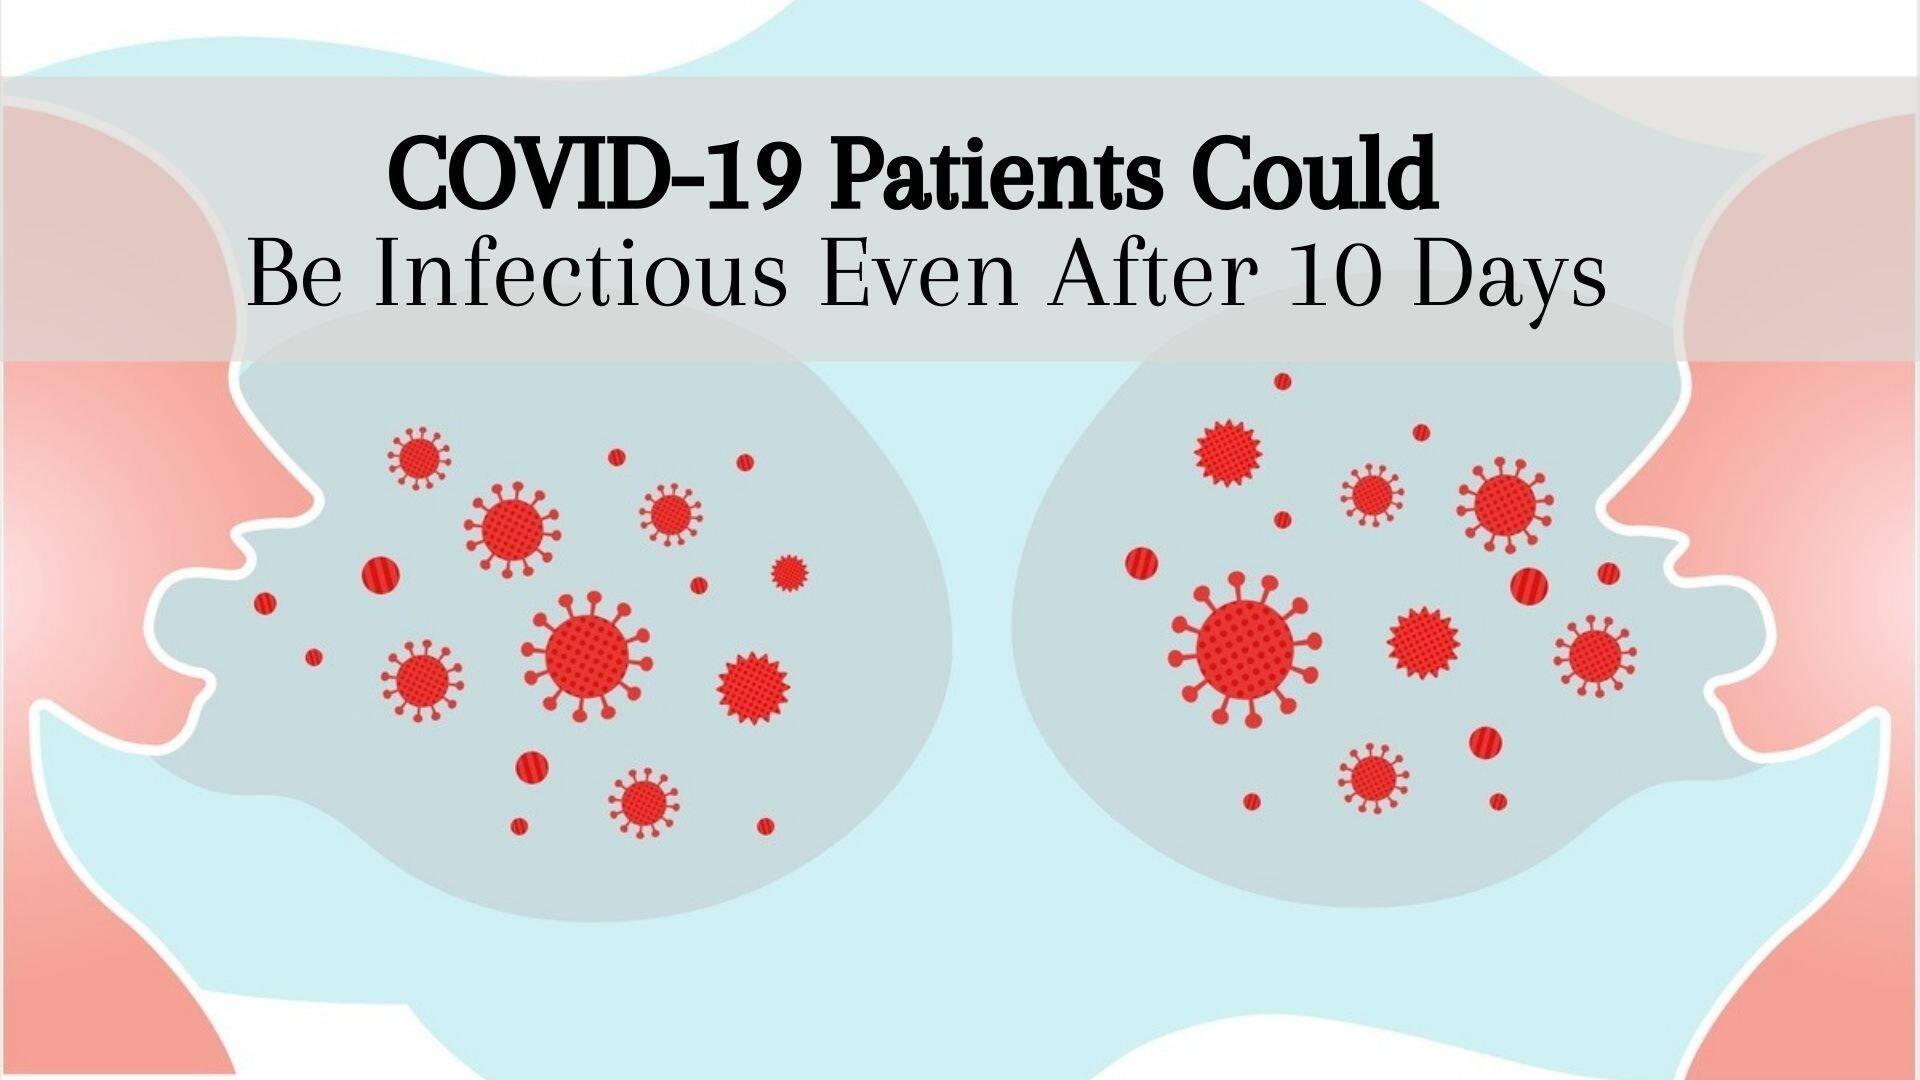 COVID-19 Patients Can Spread The Infection To Others Even After 10 Days Quarantine Period: Study